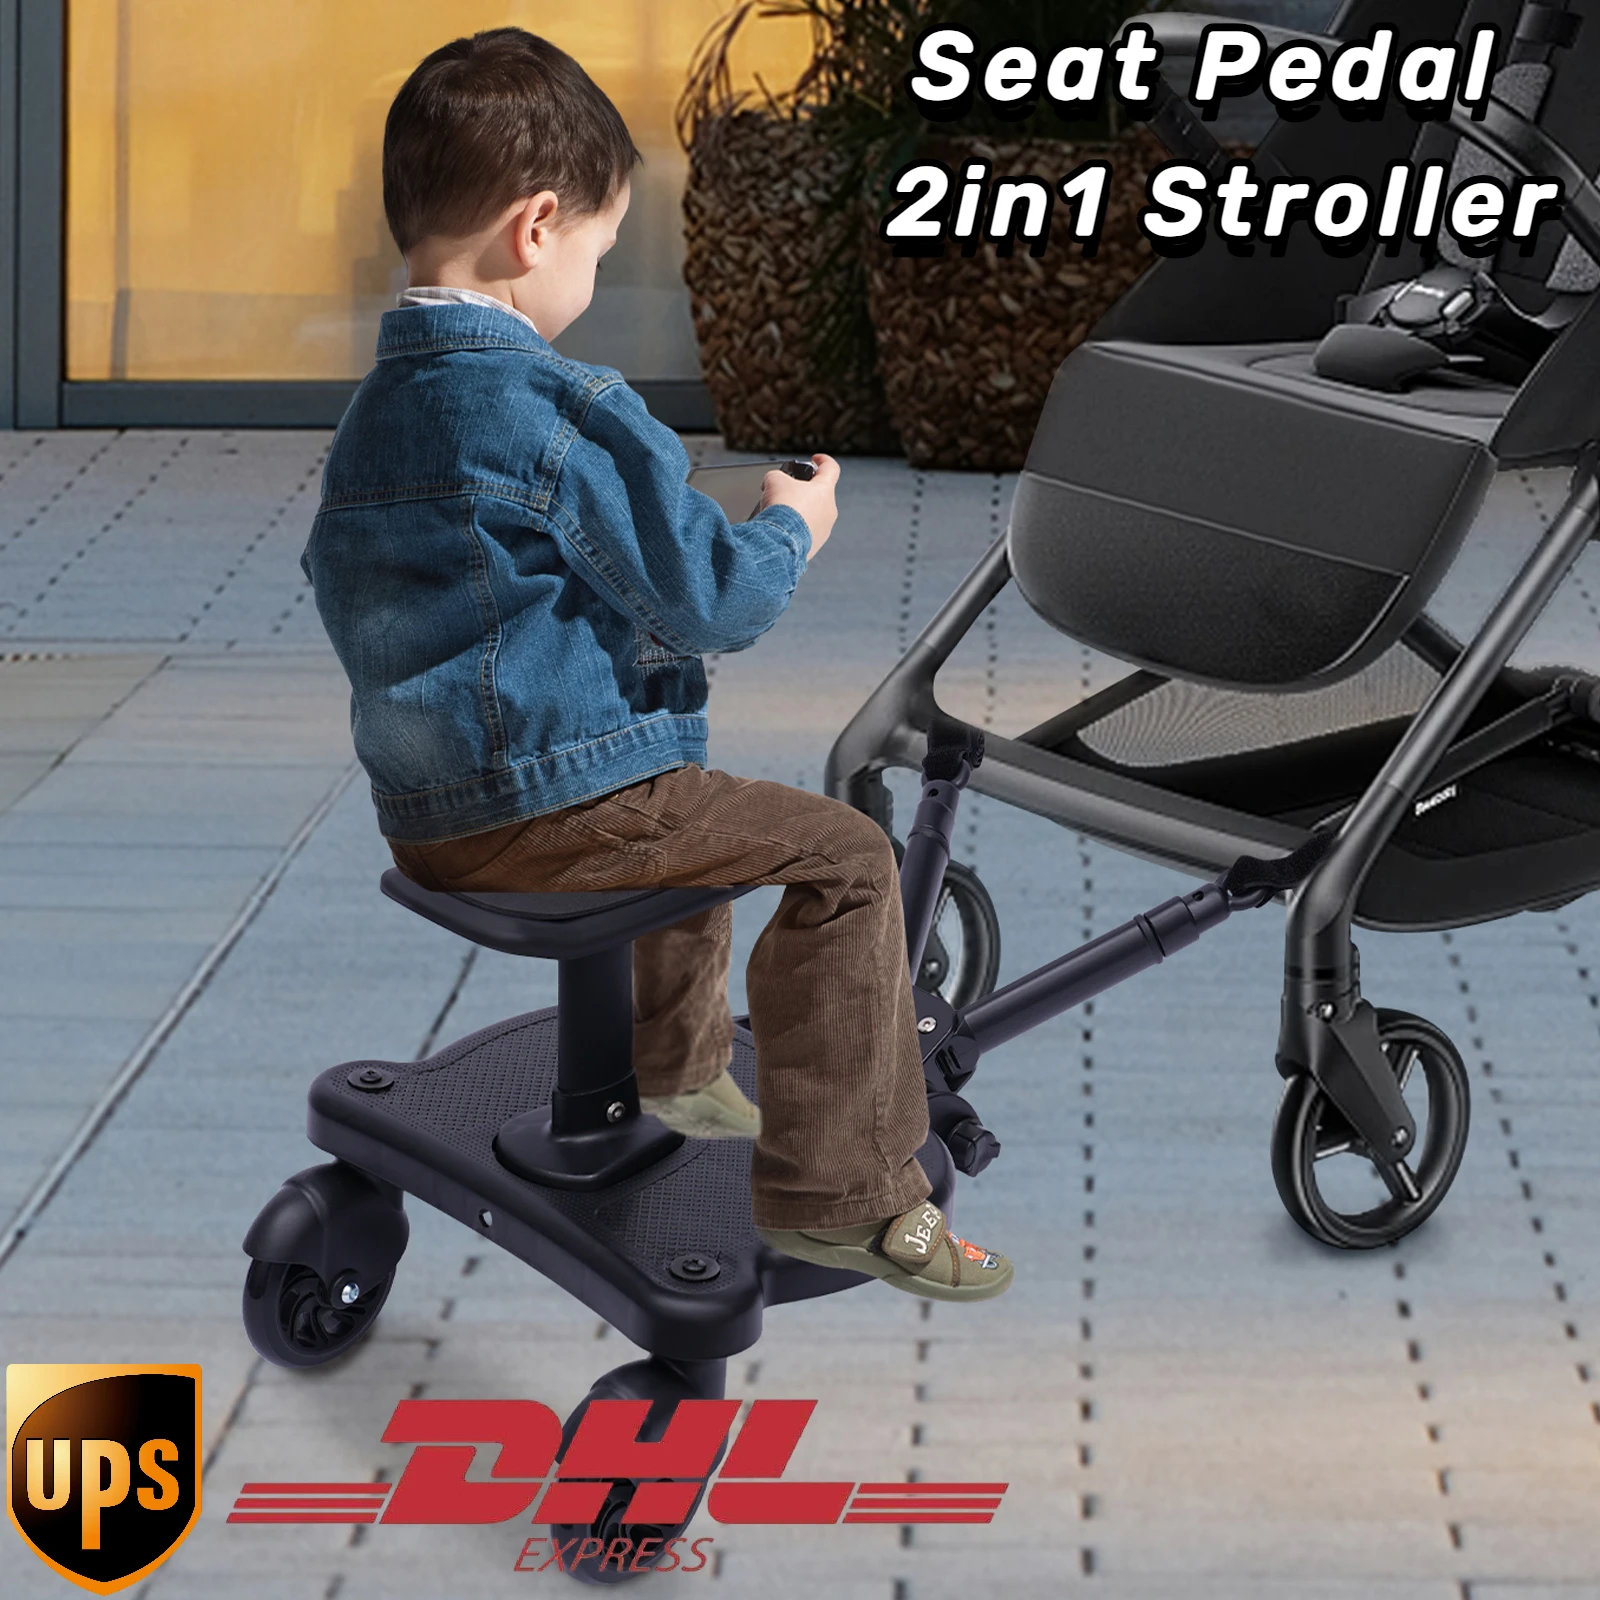 Stroller Board Universal 2in1 Stroller Ride Board Buggy Wheeled Board Seat Pedal with Detachable Seat Standing Board medium size guitar effect pedal board aluminum alloy pedalboard 19 7×7 5 inch with carrying bag